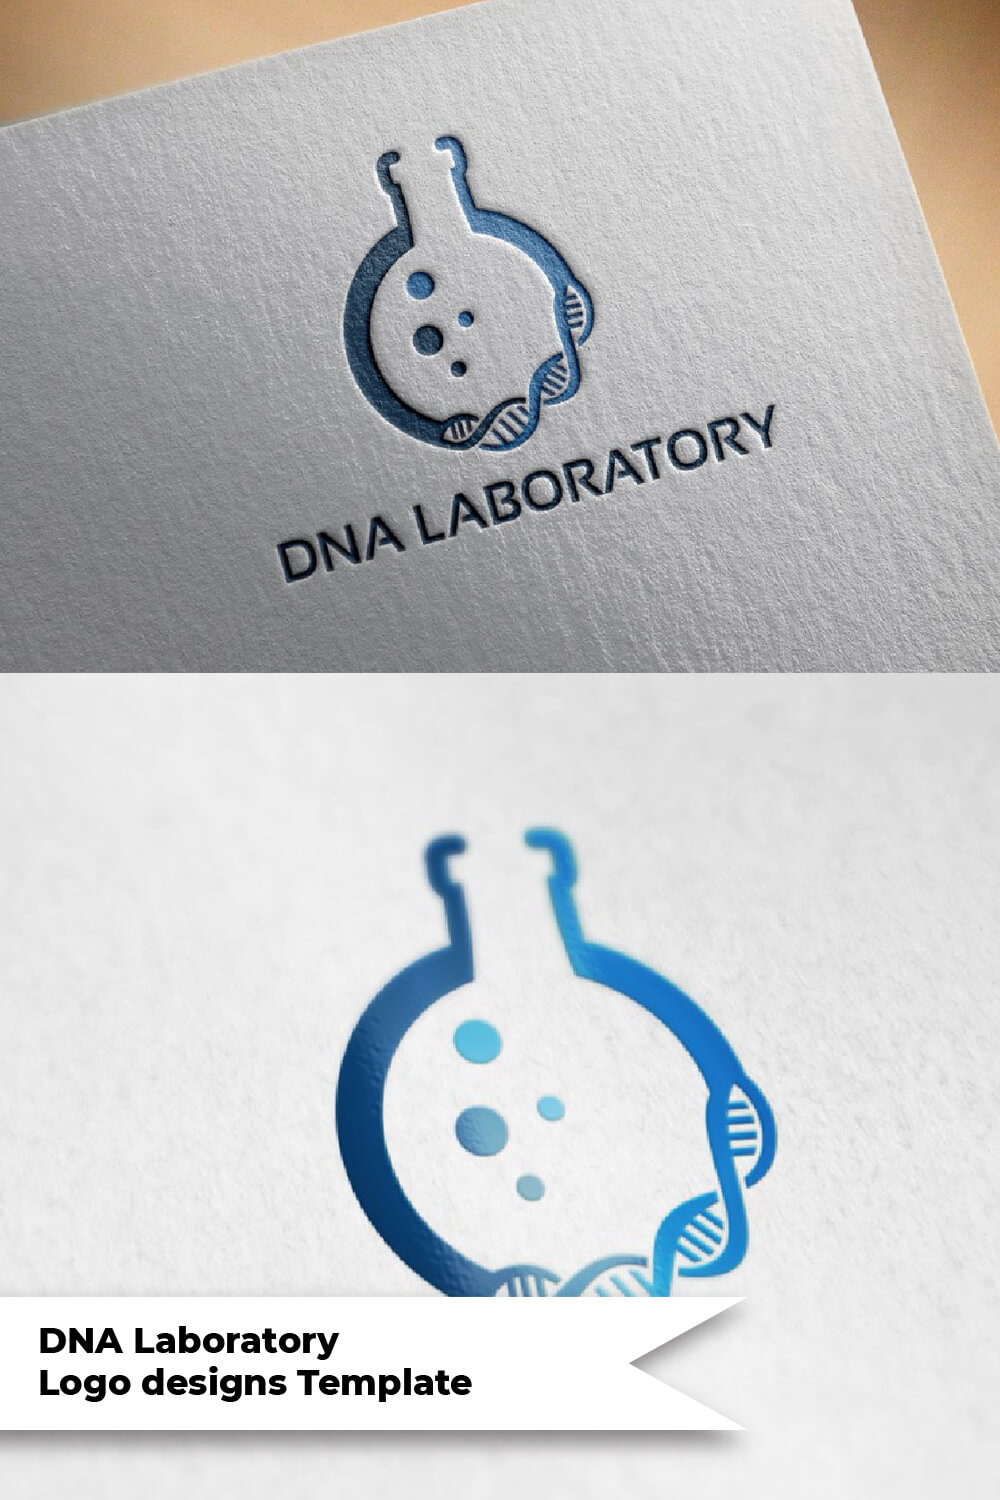 DNA laboratory logo on gray and white paper.